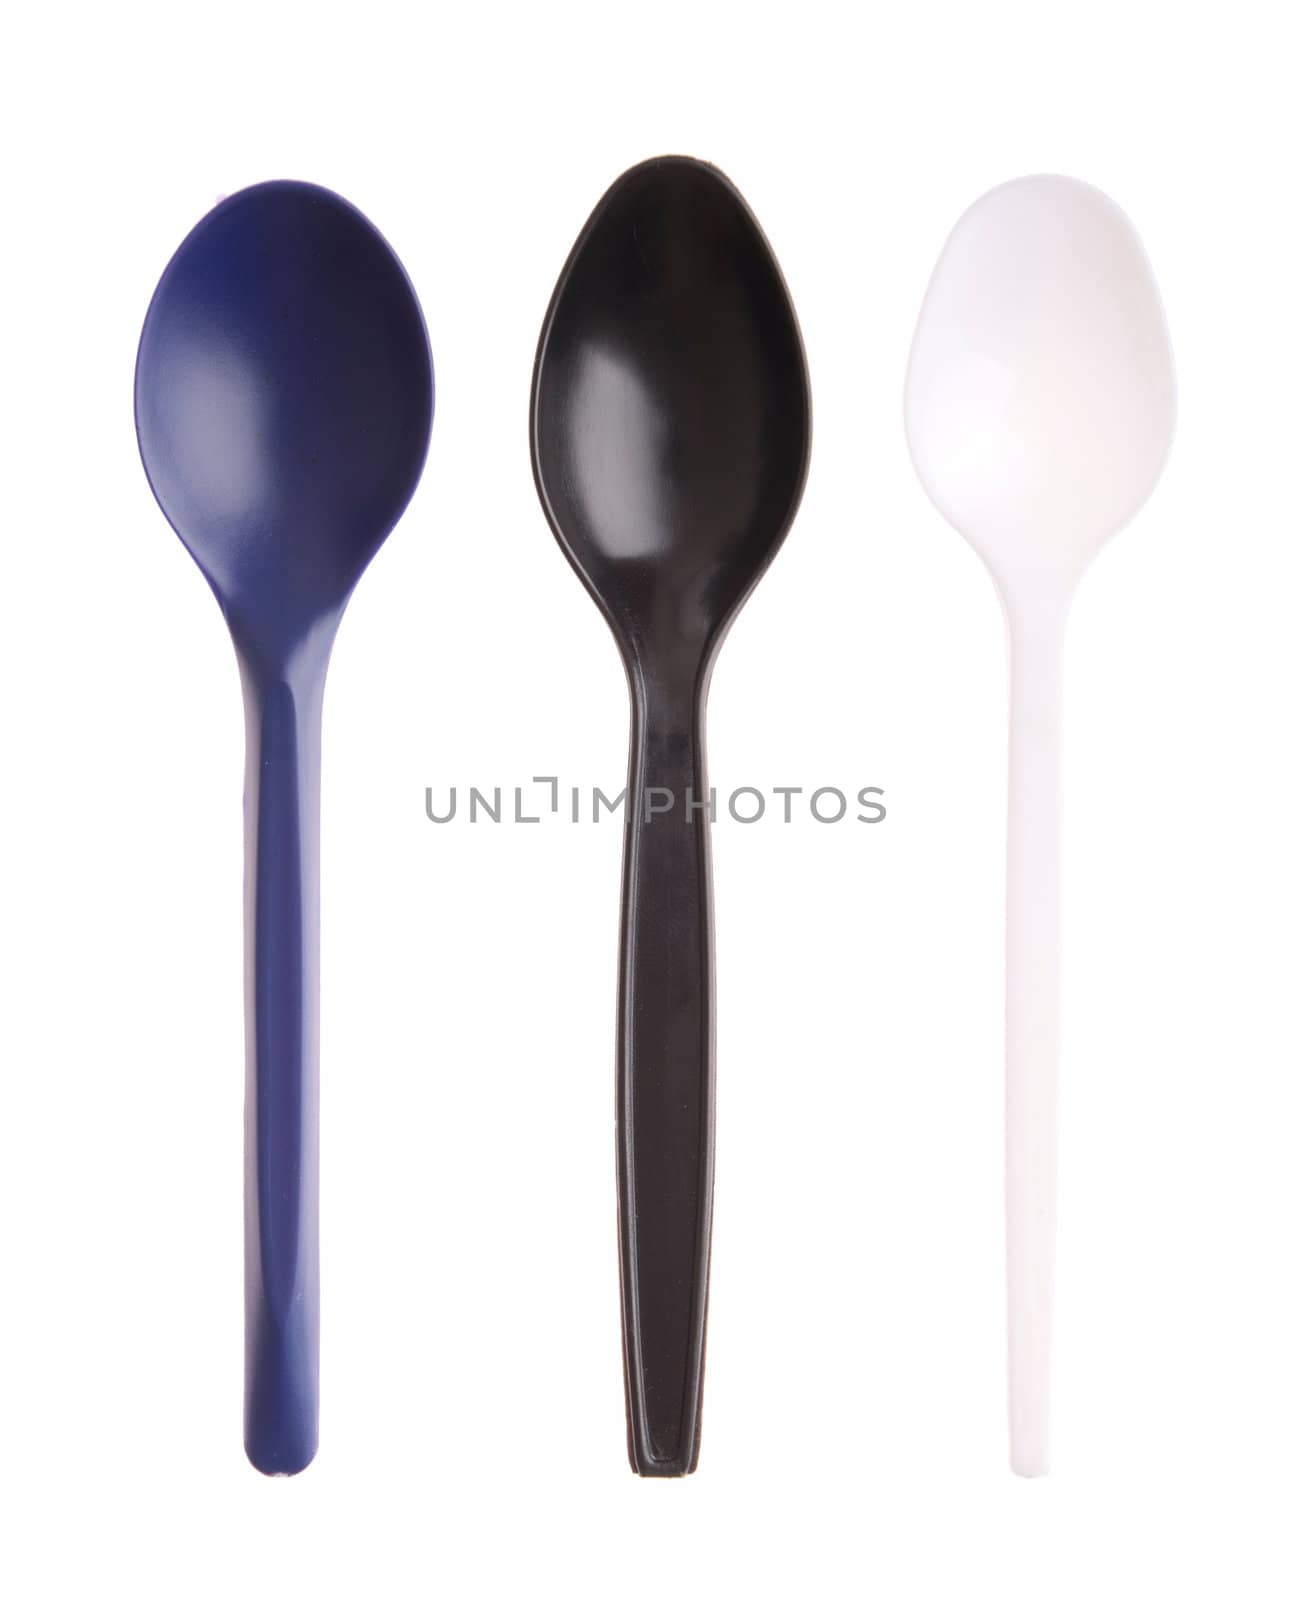 three plastic spoons (blue, black and white) isolated on white background